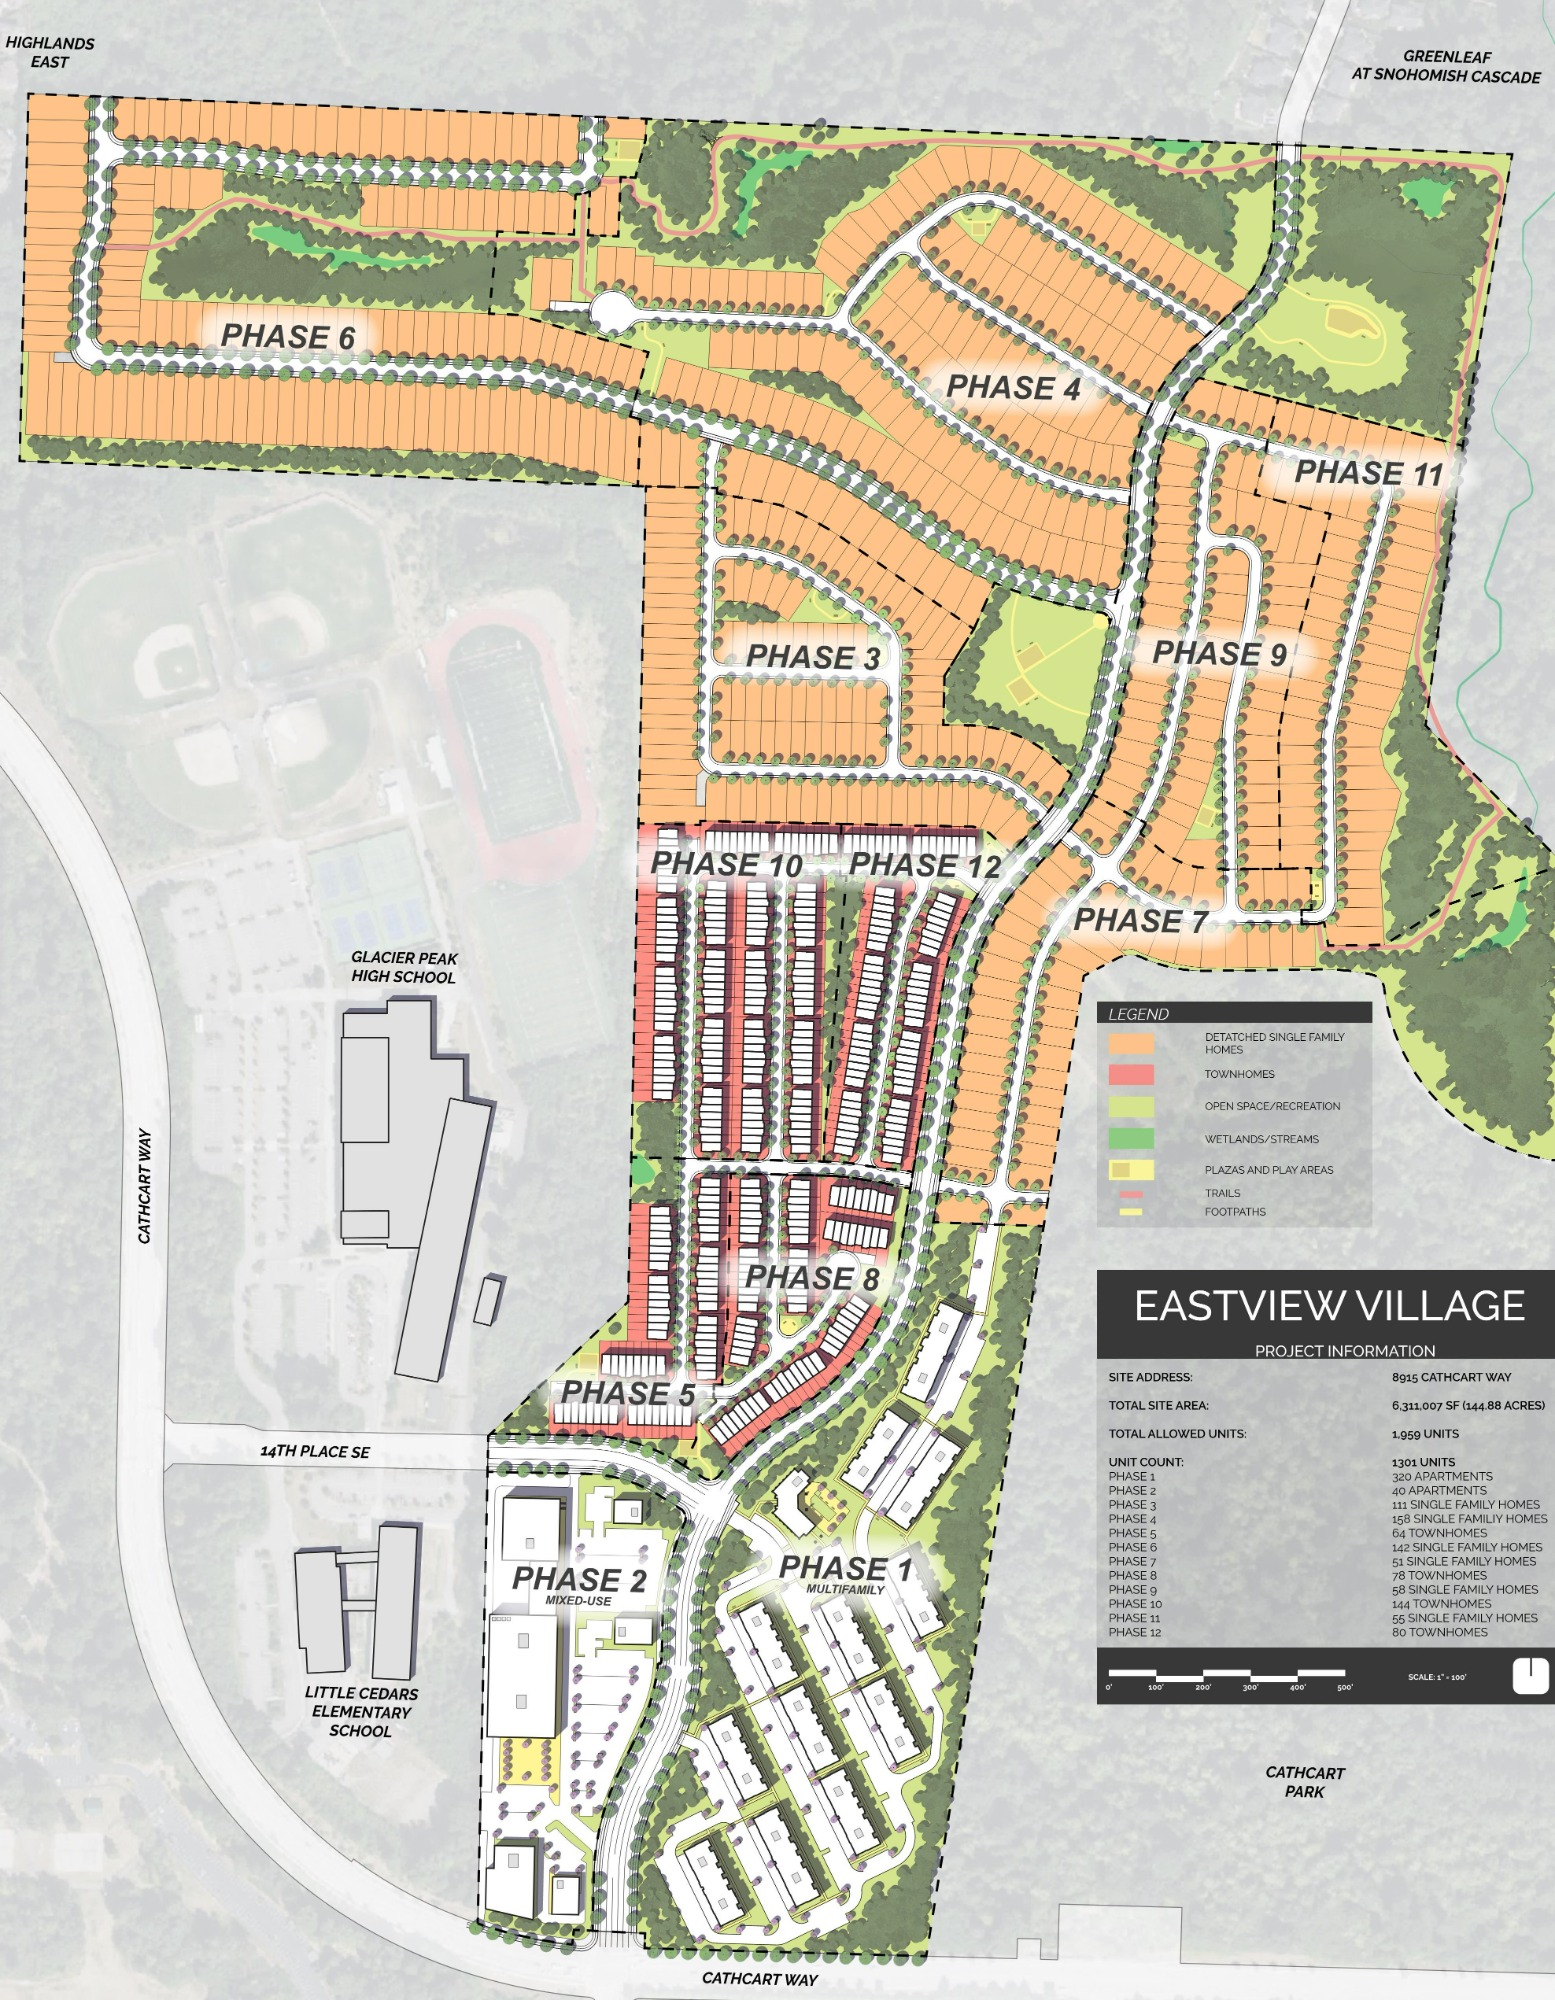 Eastview Village Project Image